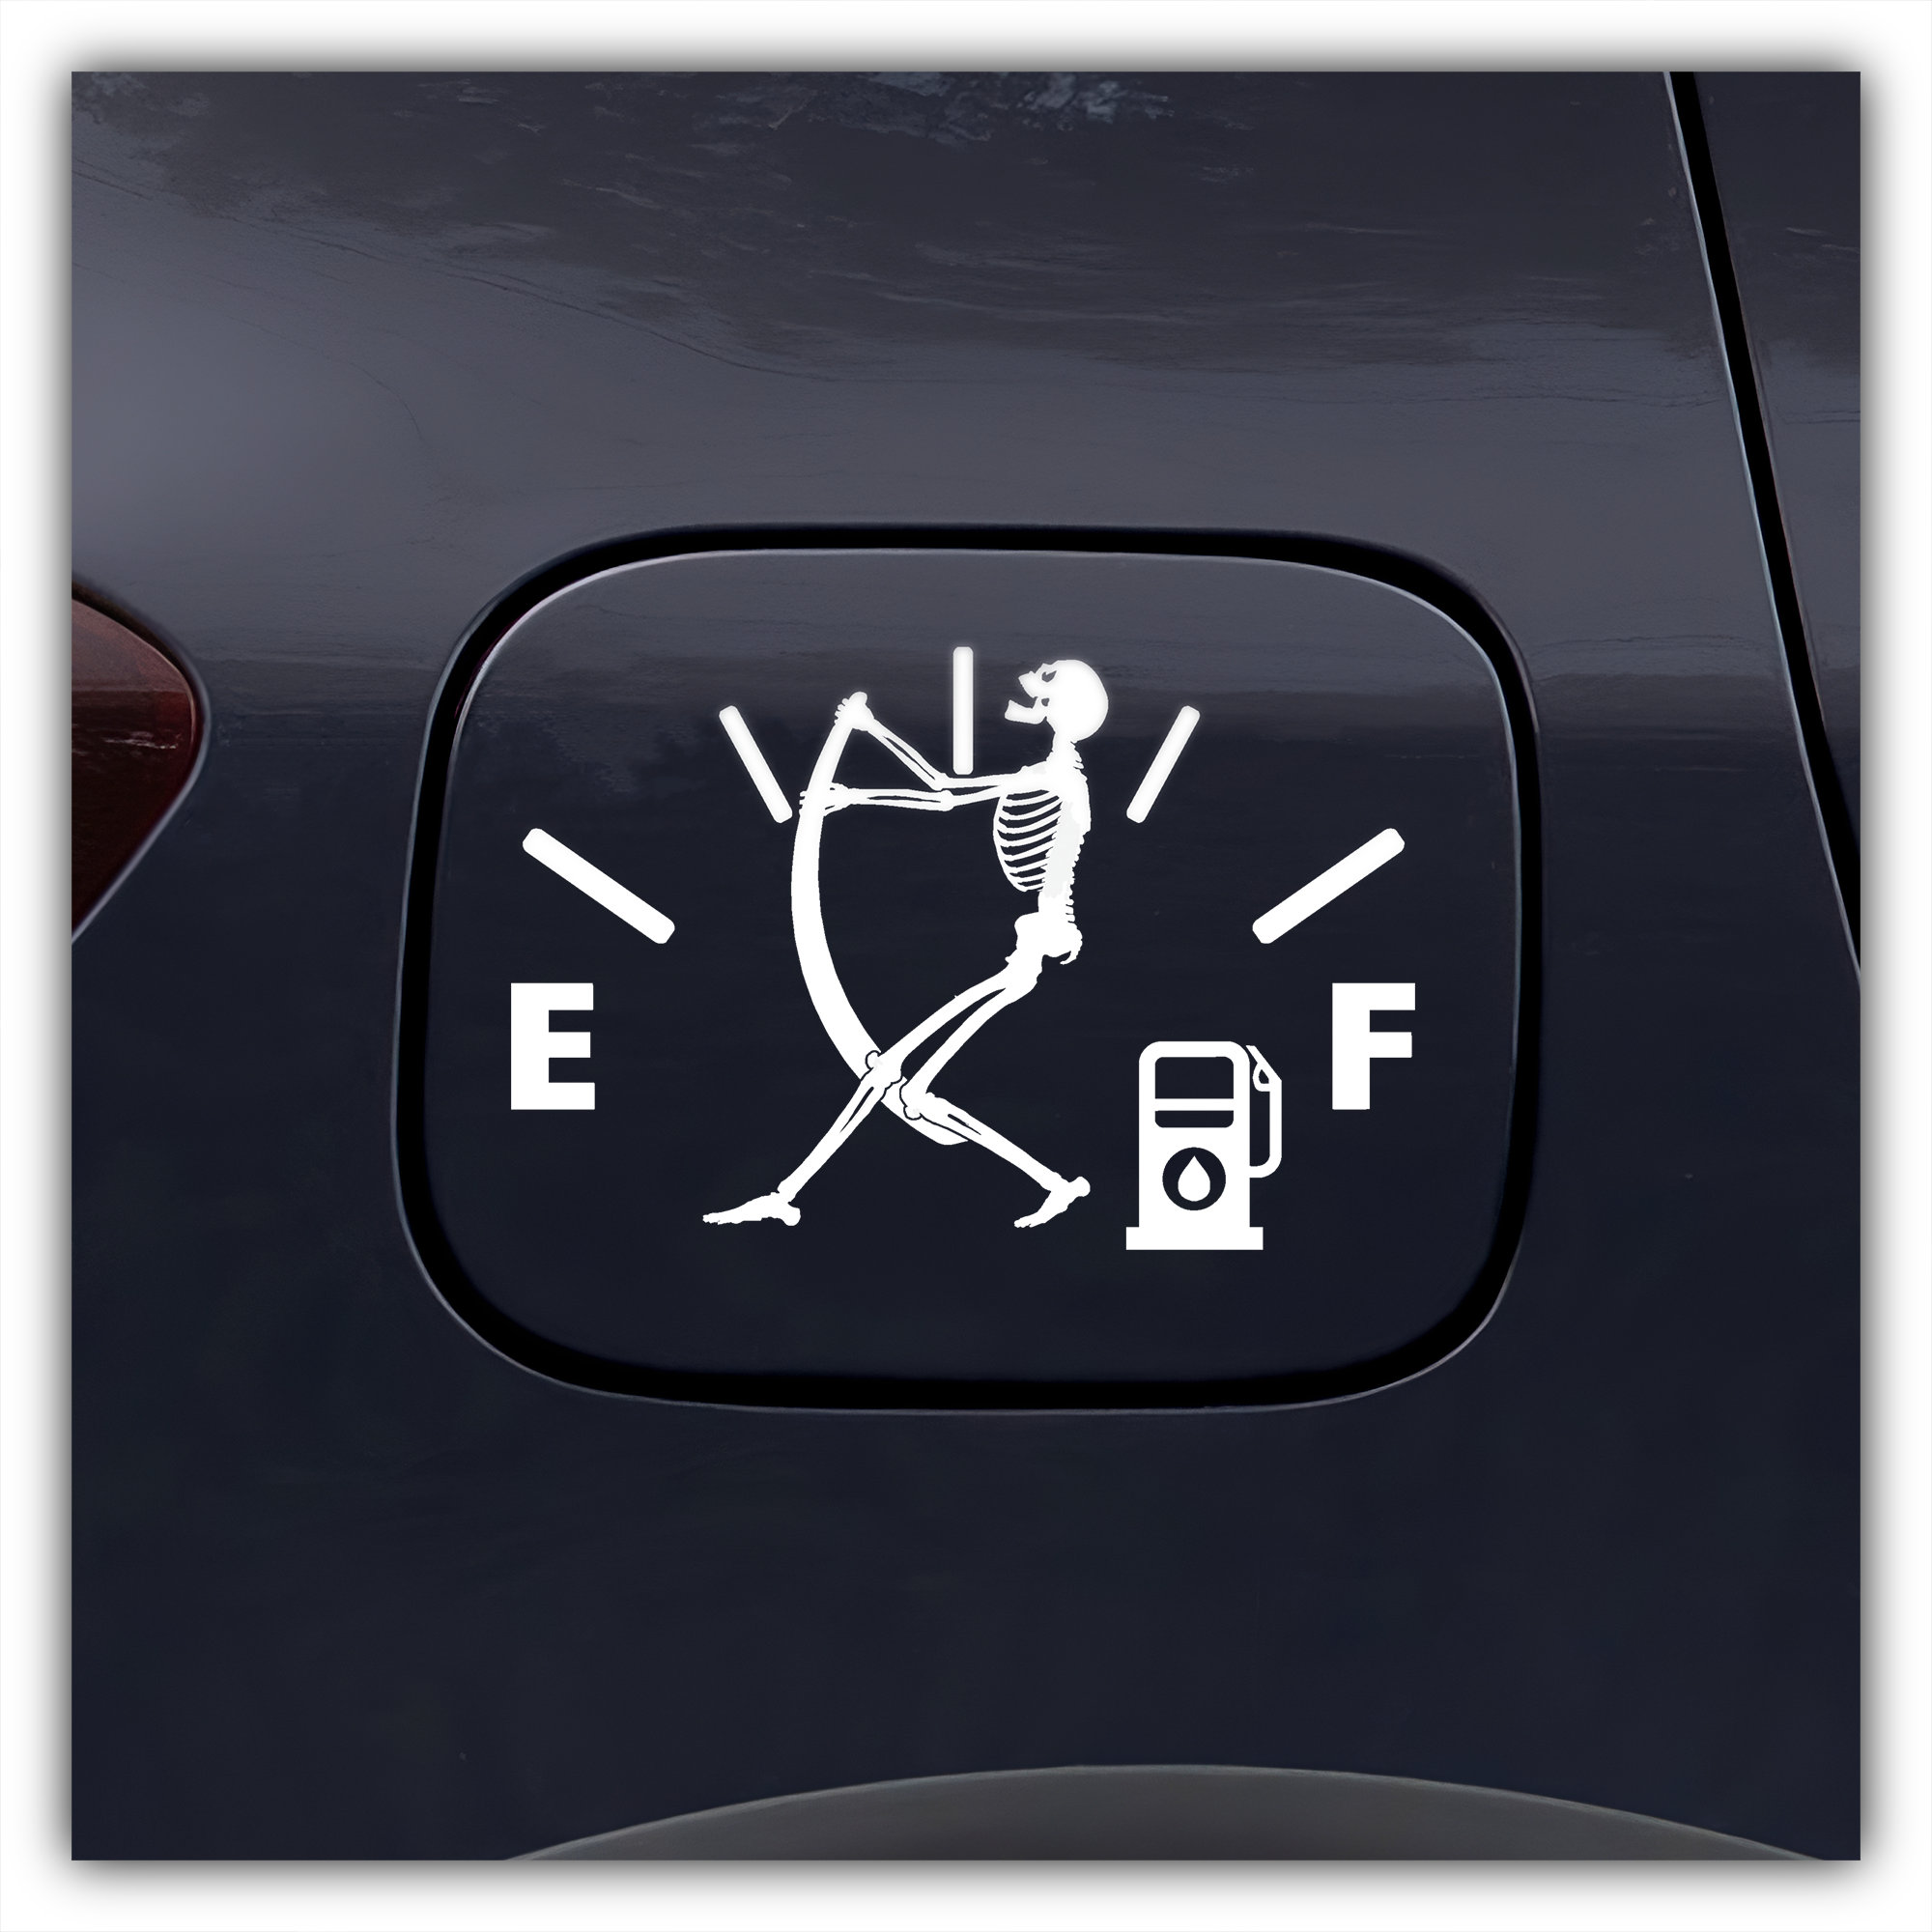 Vw Volkswagen Funny Gas Gauge Window Decal Sticker For Cars And Trucks, Custom Made In the USA, Fast Shipping